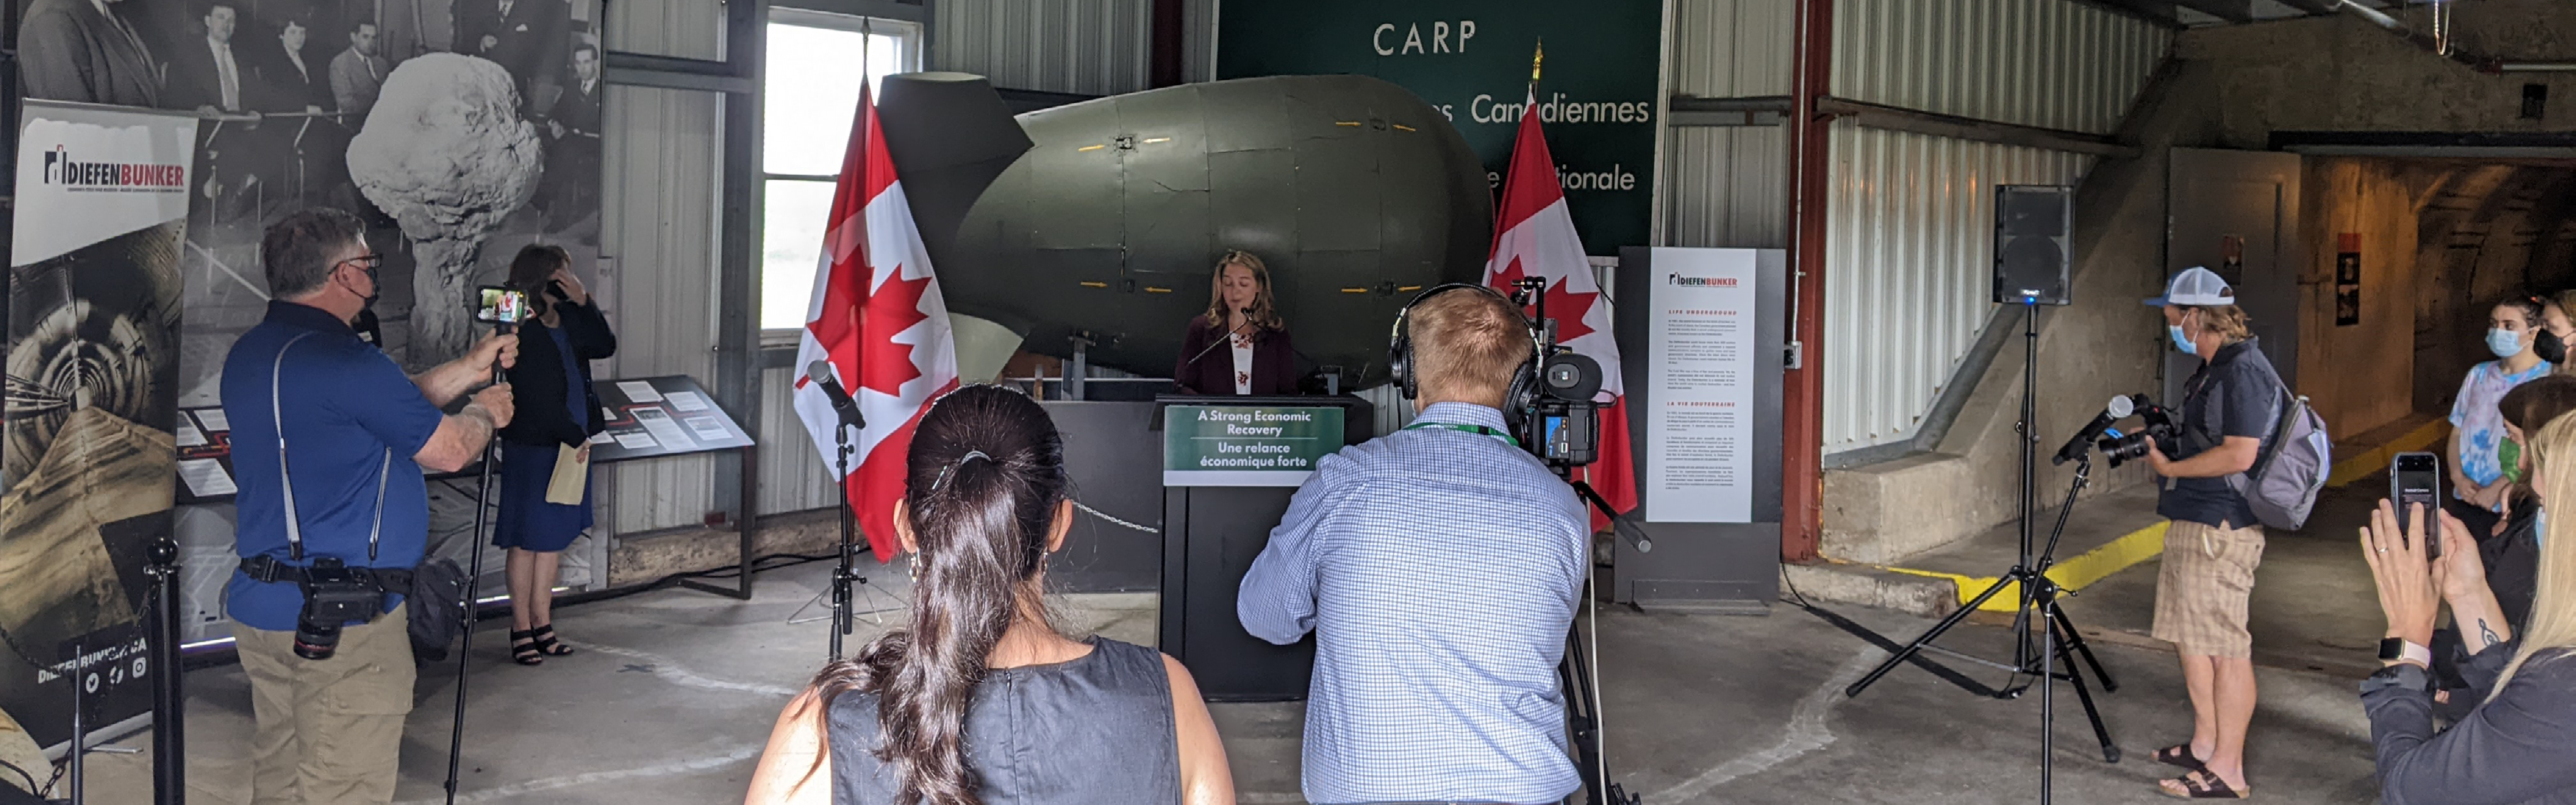 Media announcement inside the Diefenbunker.